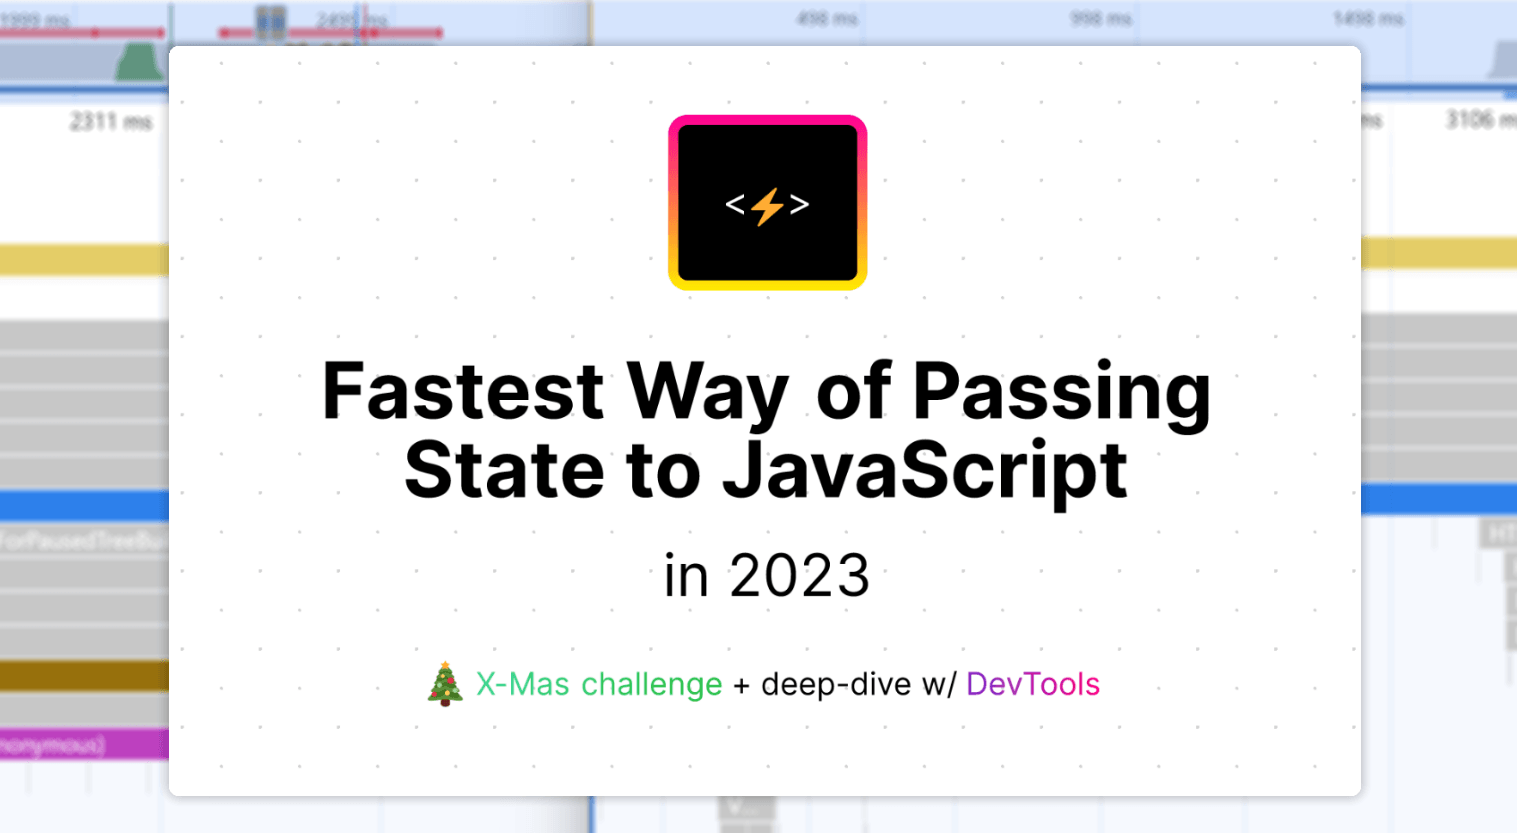 Fastest Way of Passing State to JavaScript, Re-visited